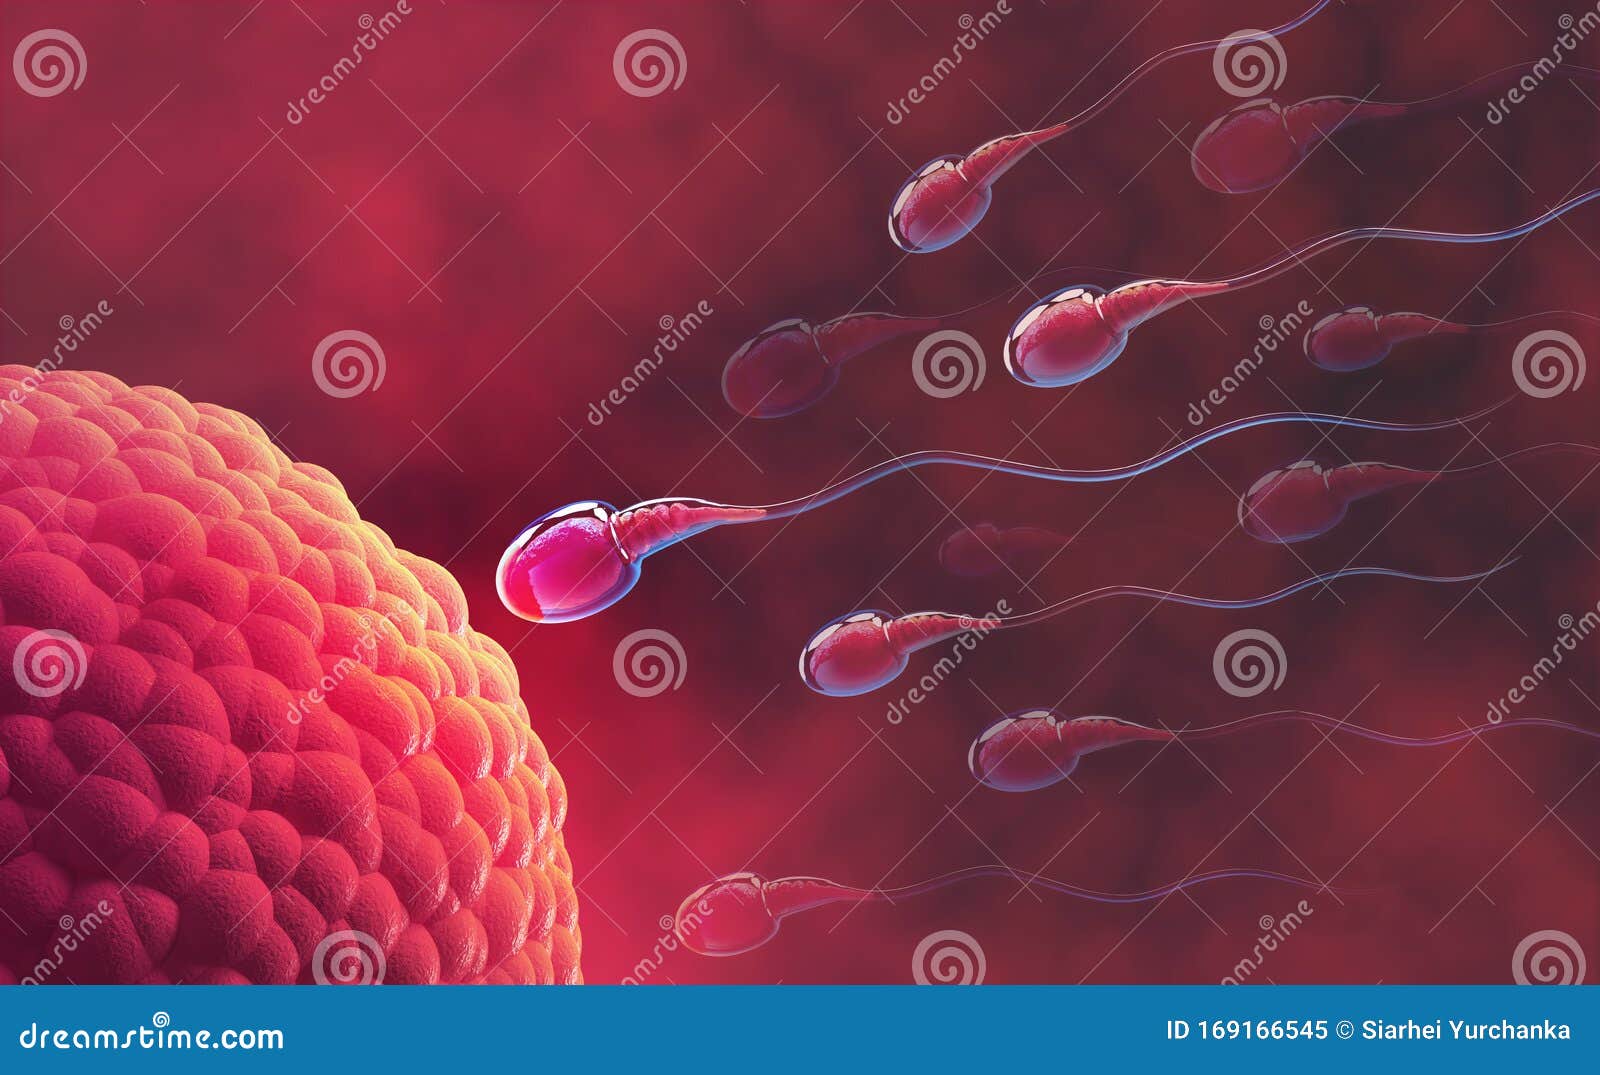 Sperm And Egg Cell Under The Microscope Embryology Natural